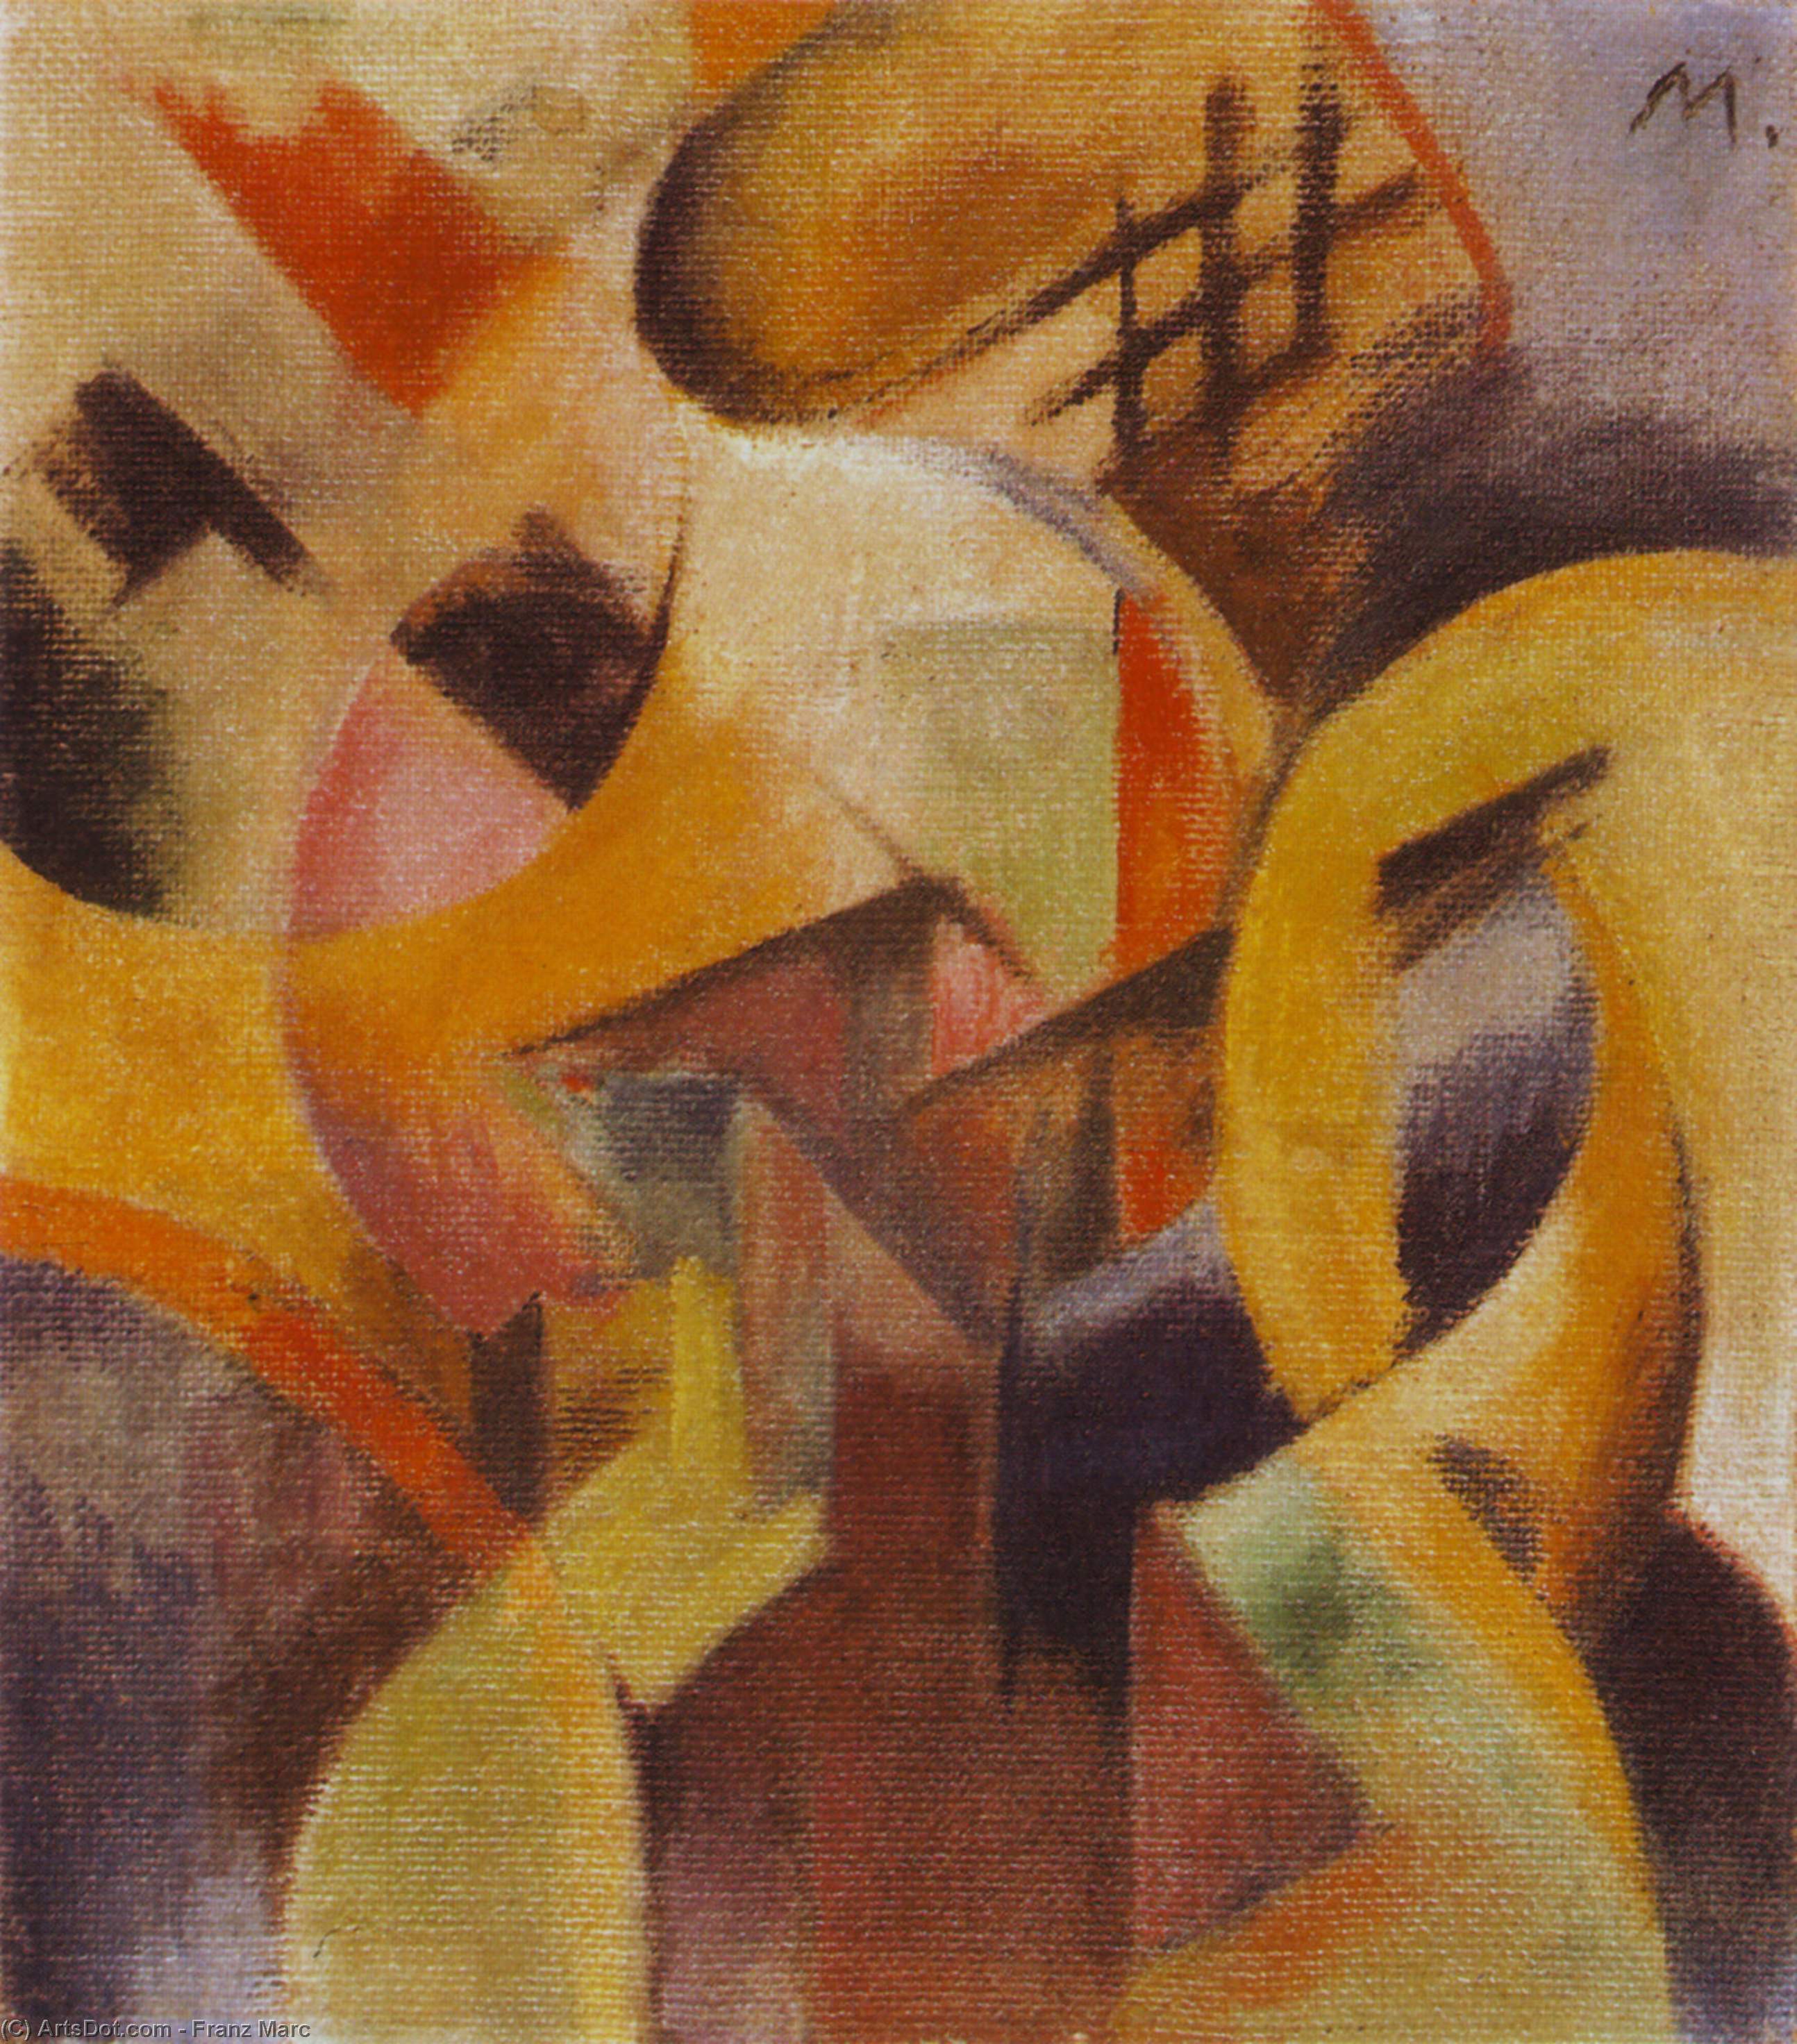 WikiOO.org - 백과 사전 - 회화, 삽화 Franz Marc - Small Composition I